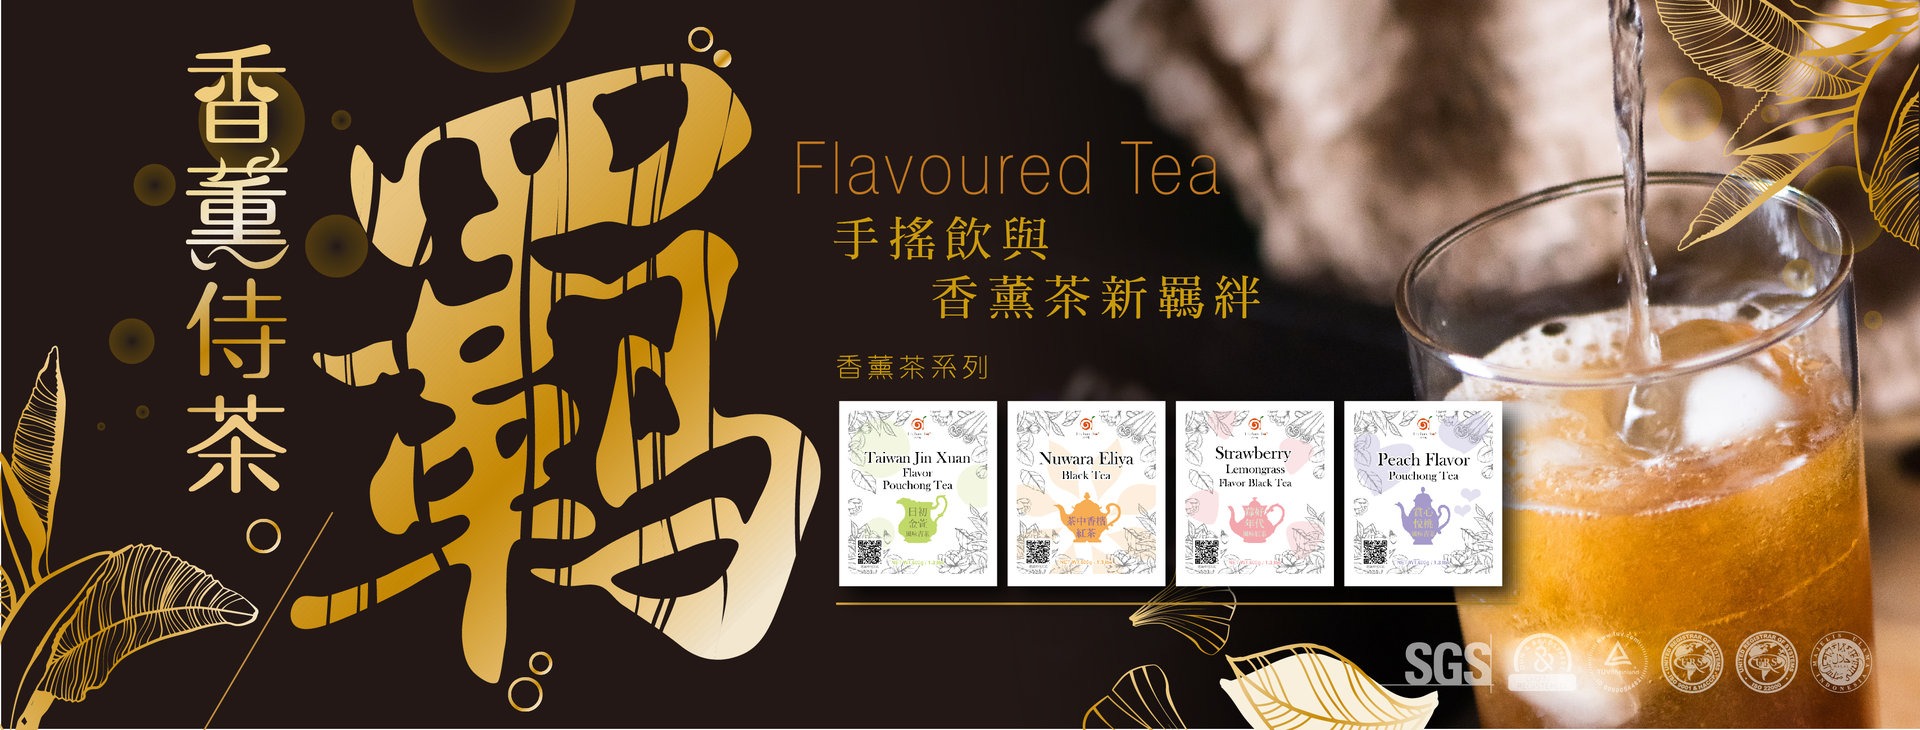 【2021 New Product】Flavoured Tea